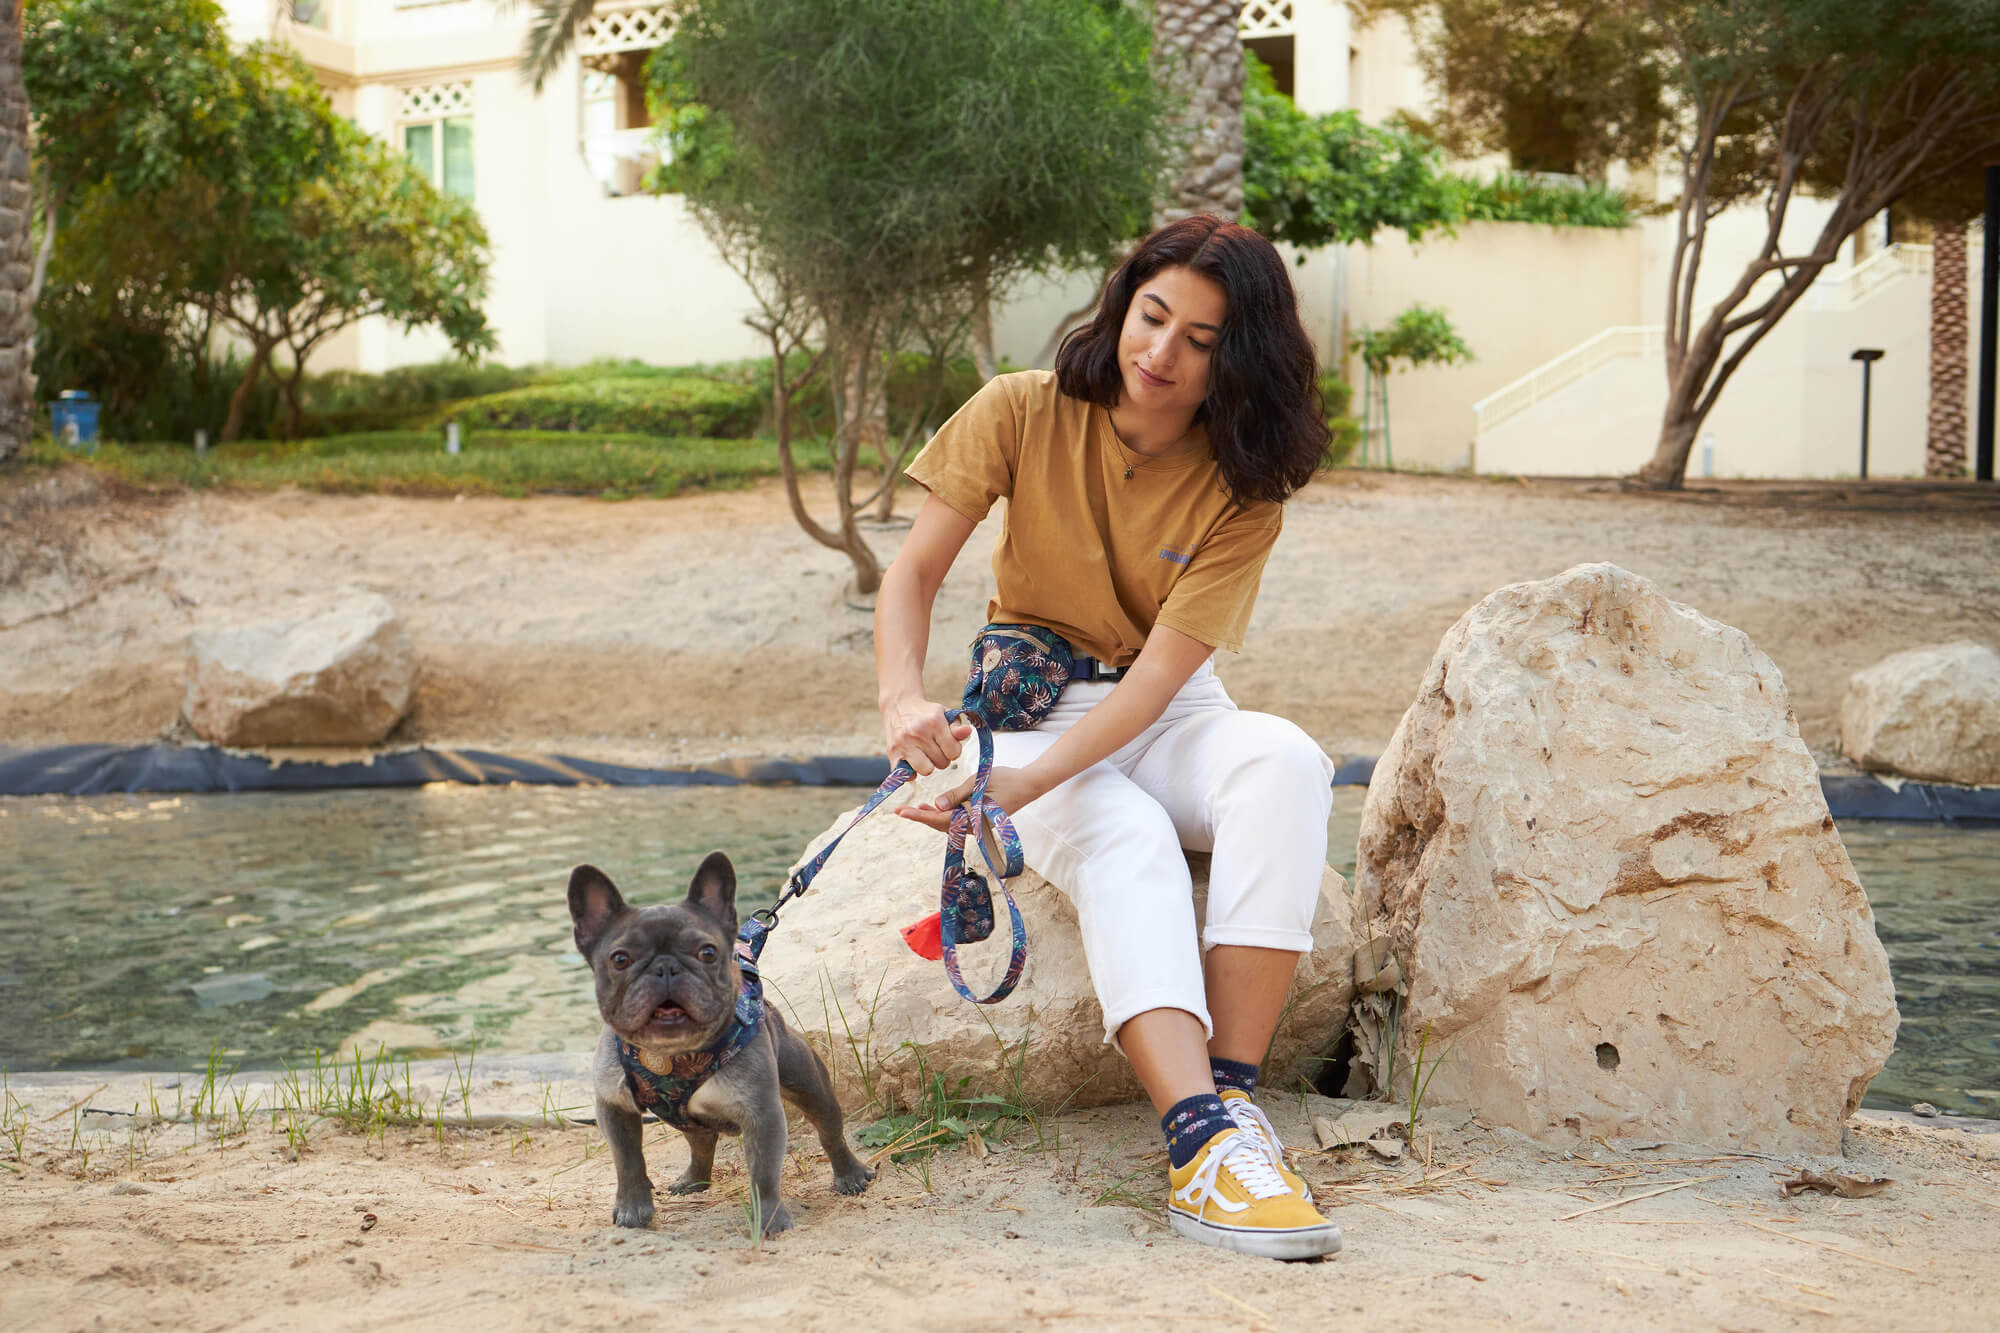 Pet Care 101: 8 Dog Walking Mistakes You Should Avoid